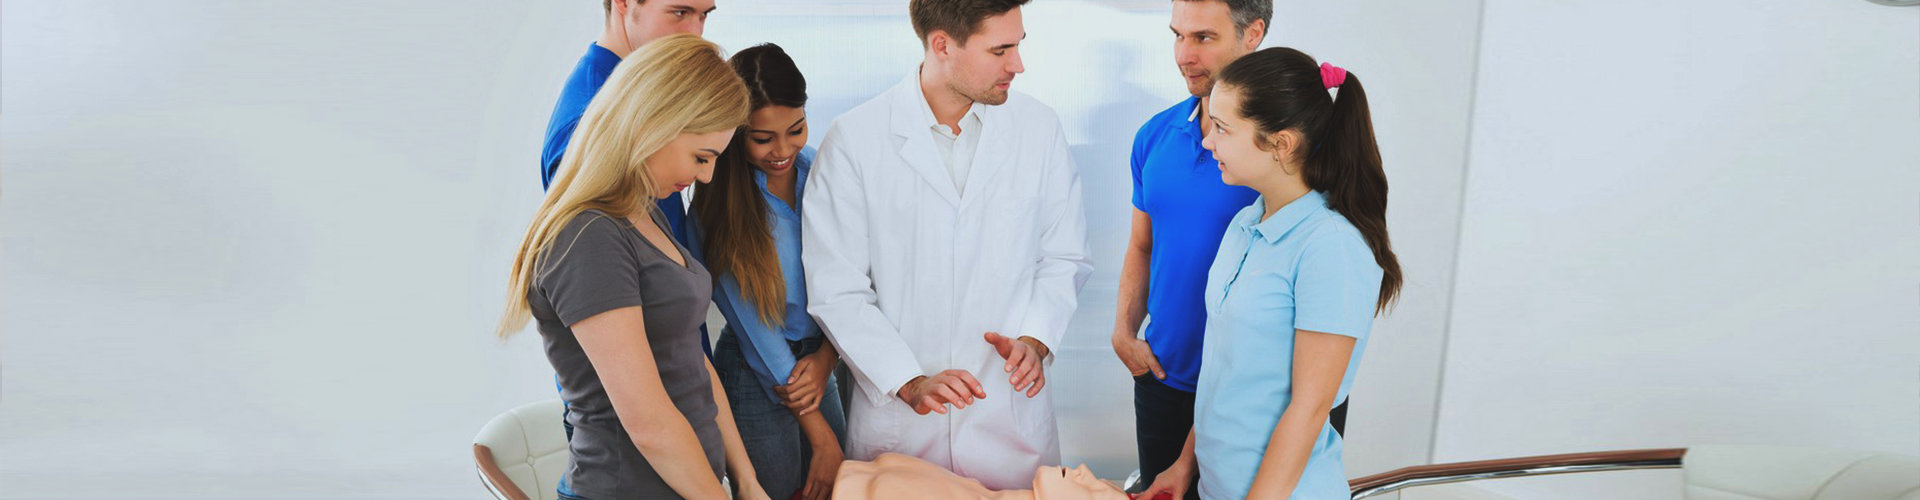 doctor teaches cpr to trainees